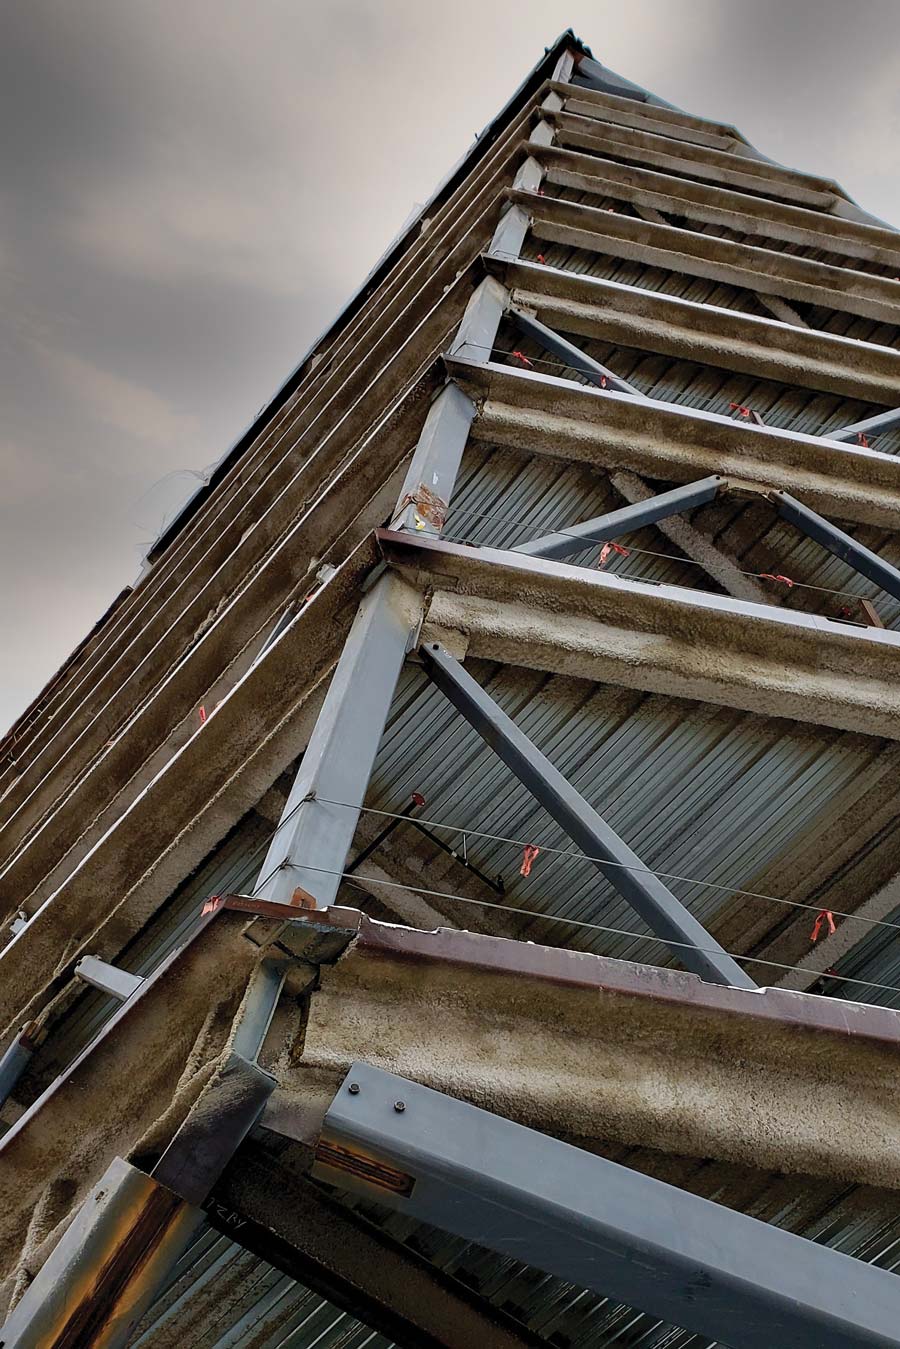 The “prow” splits below the second floor into a nearly horizontal beam (lower right), designed only to carry wind stresses, and the “Jenga Column” (lower left) which holds most of the weight. If it ever fails, the “belt trusses” (middle right) can redistribute the load.